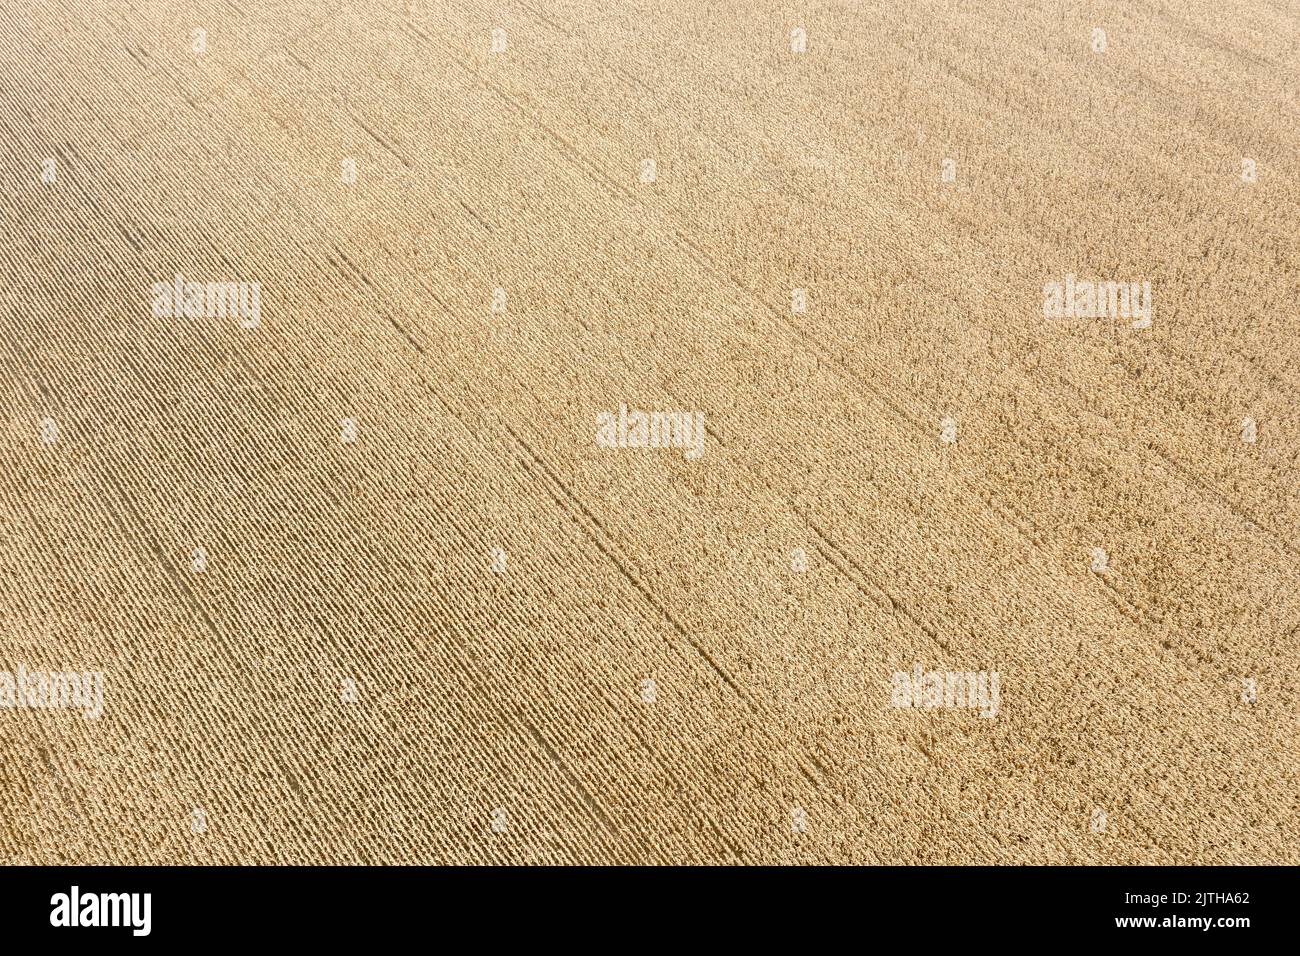 ripe wheat field. agricultural landscape. aerial overhead view. Stock Photo